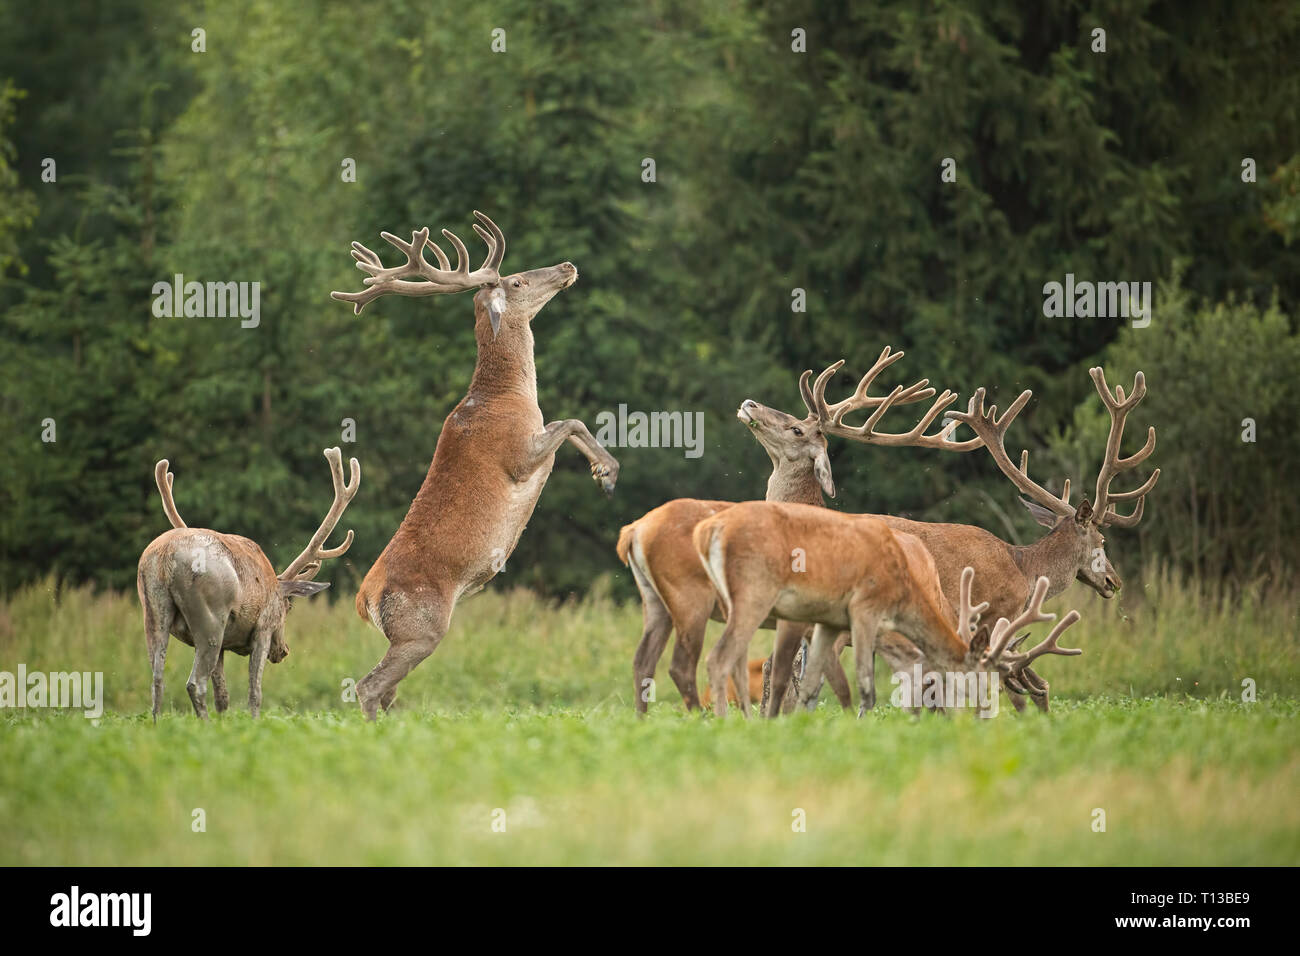 Two fighting red deer stags standing on back legs with antlers in velvet. Stock Photo